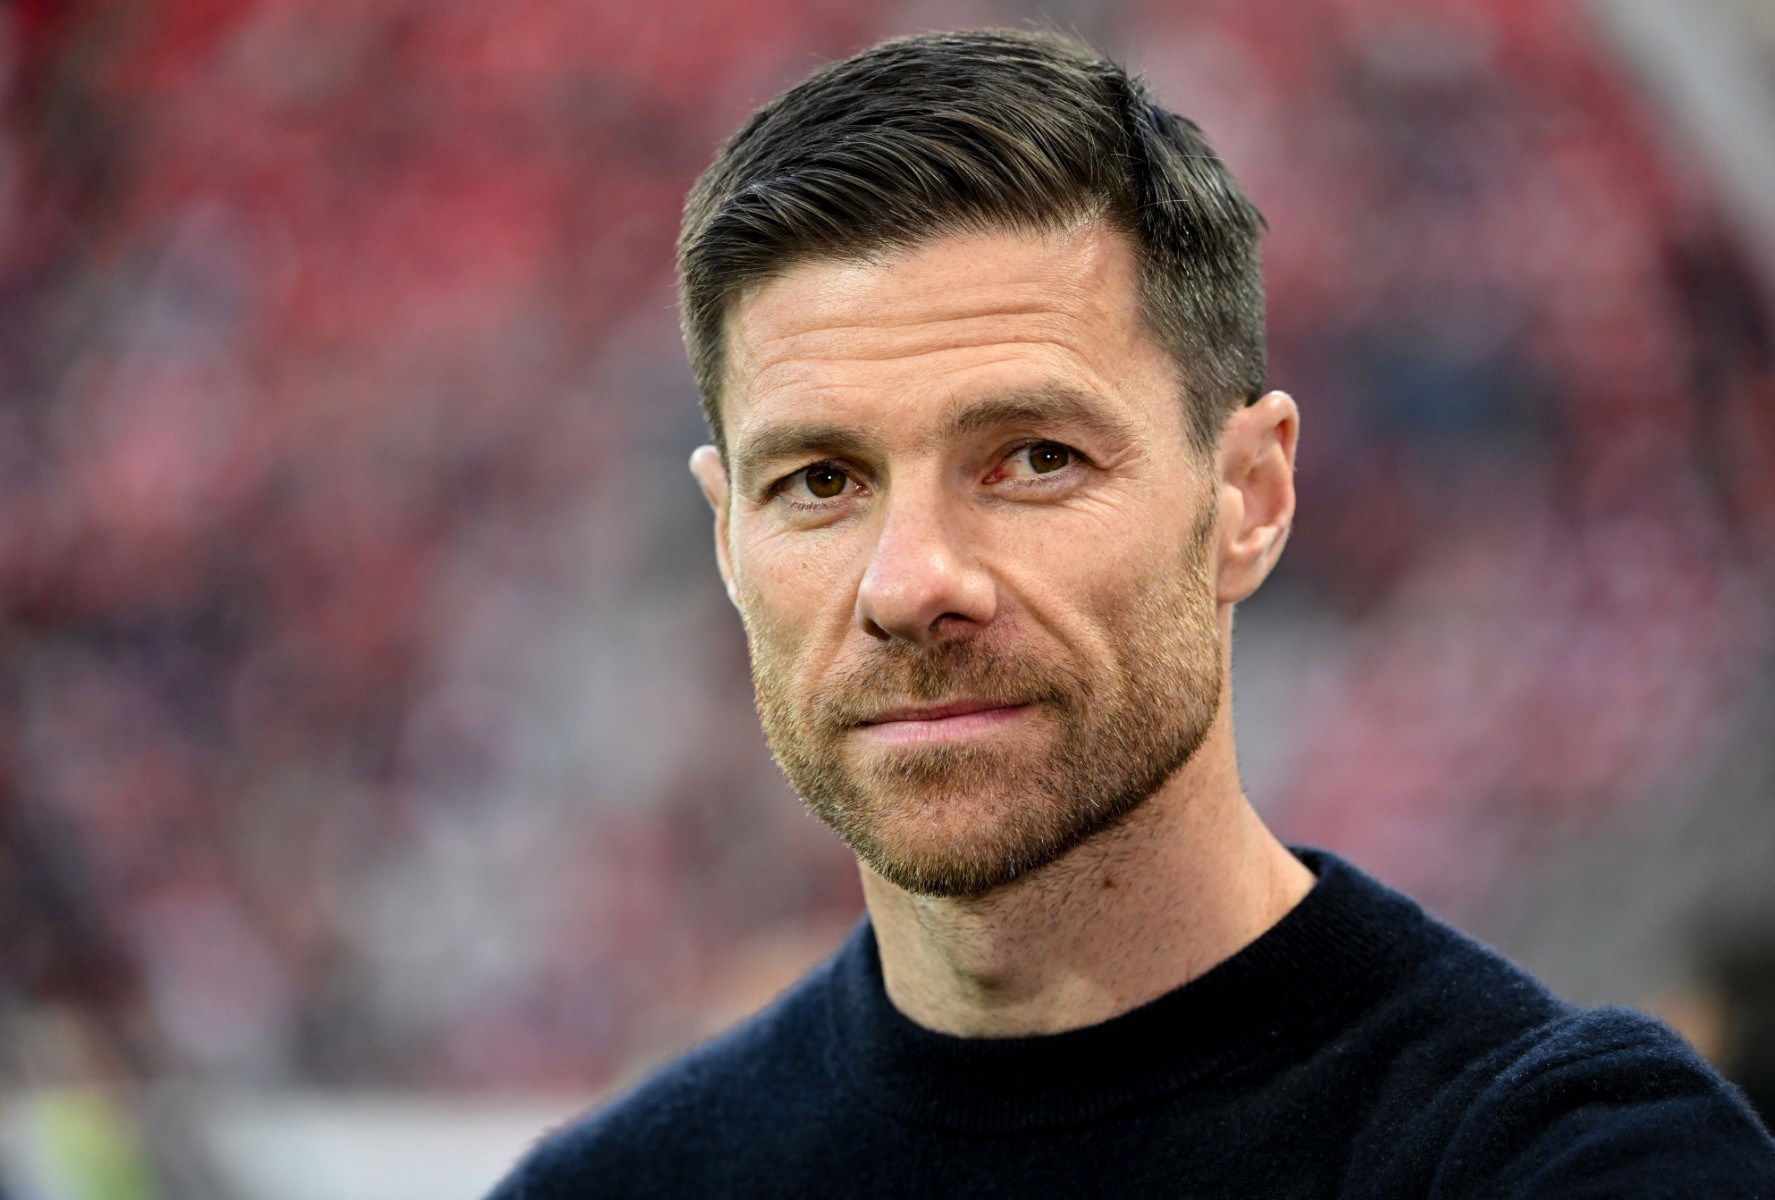 Xabi Alonso lined up to replace Carlo Ancelotti at Real Madrid